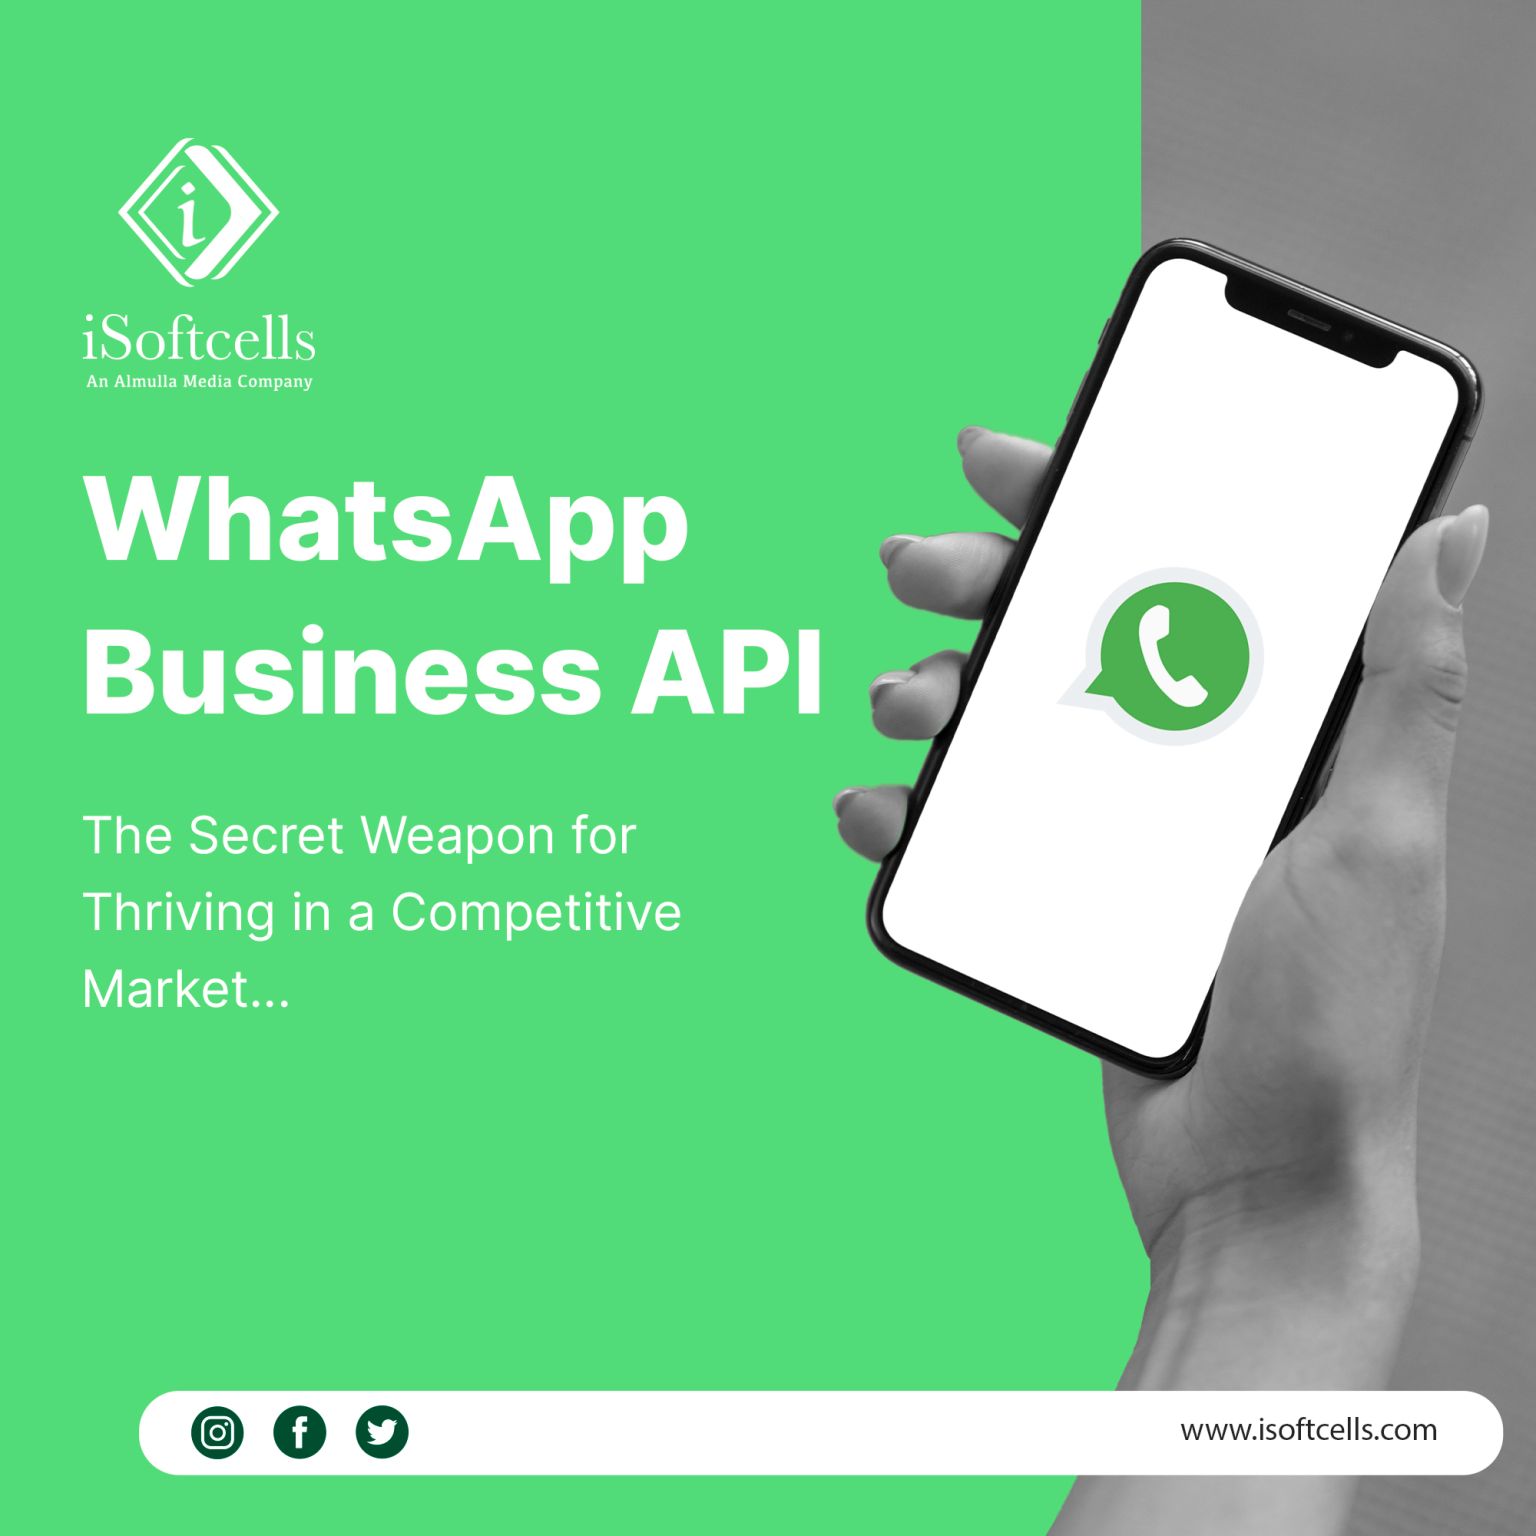 whatsApp-business-API-the-secret-weapon-for-thrivin-in-a-competitive-market